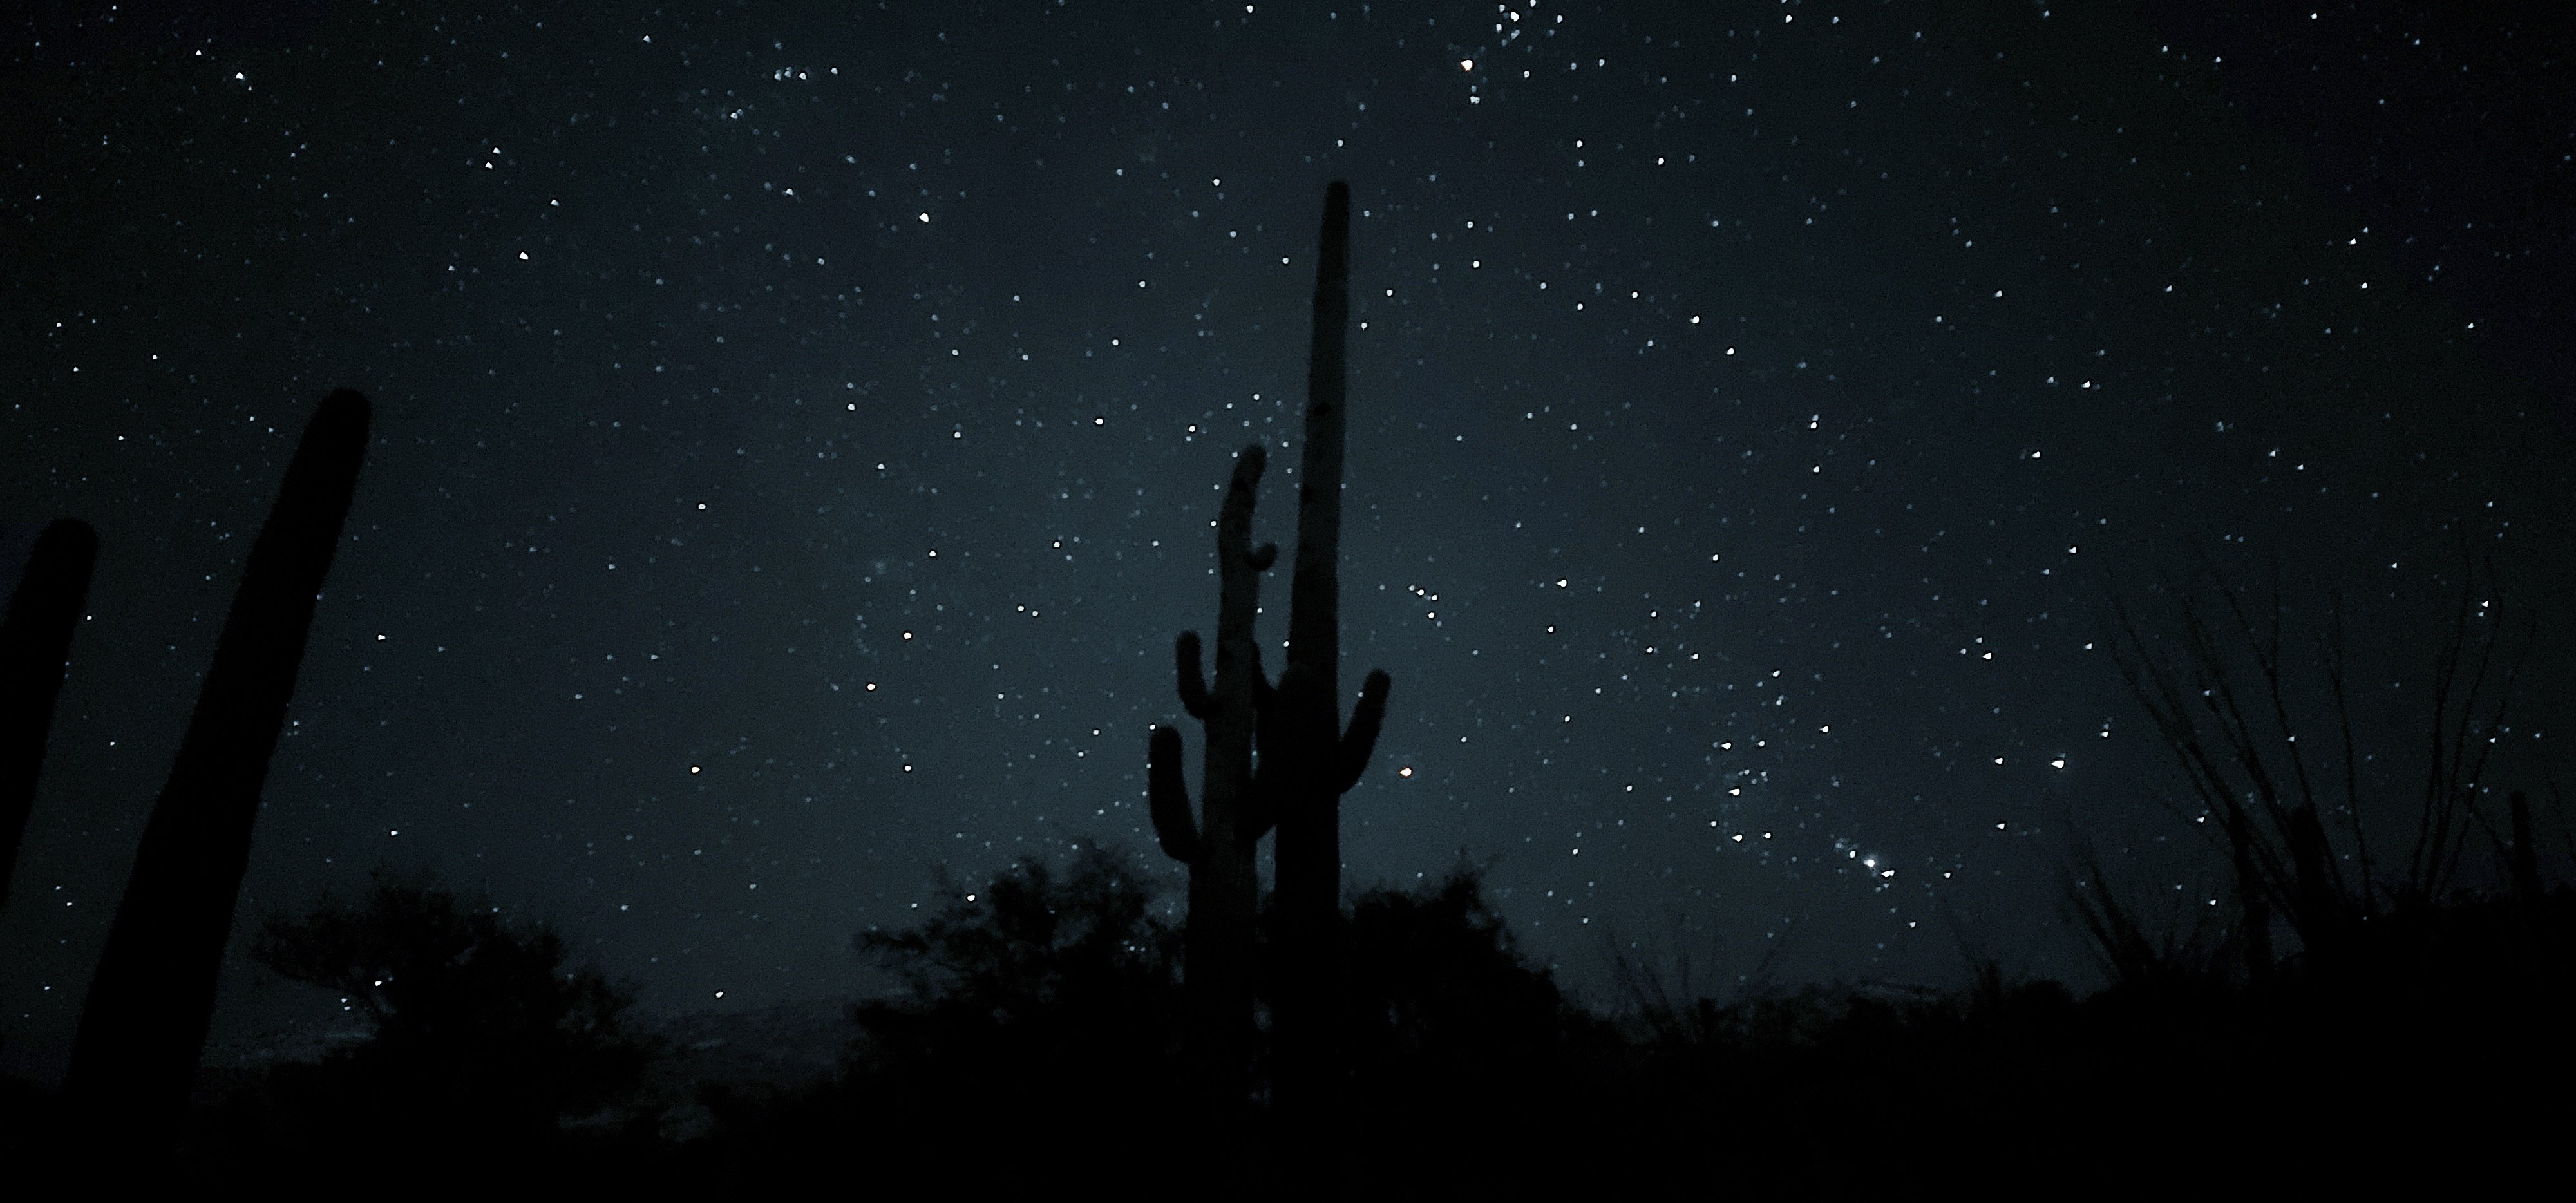 Saguaro cacti silhouetted by a starry sky.